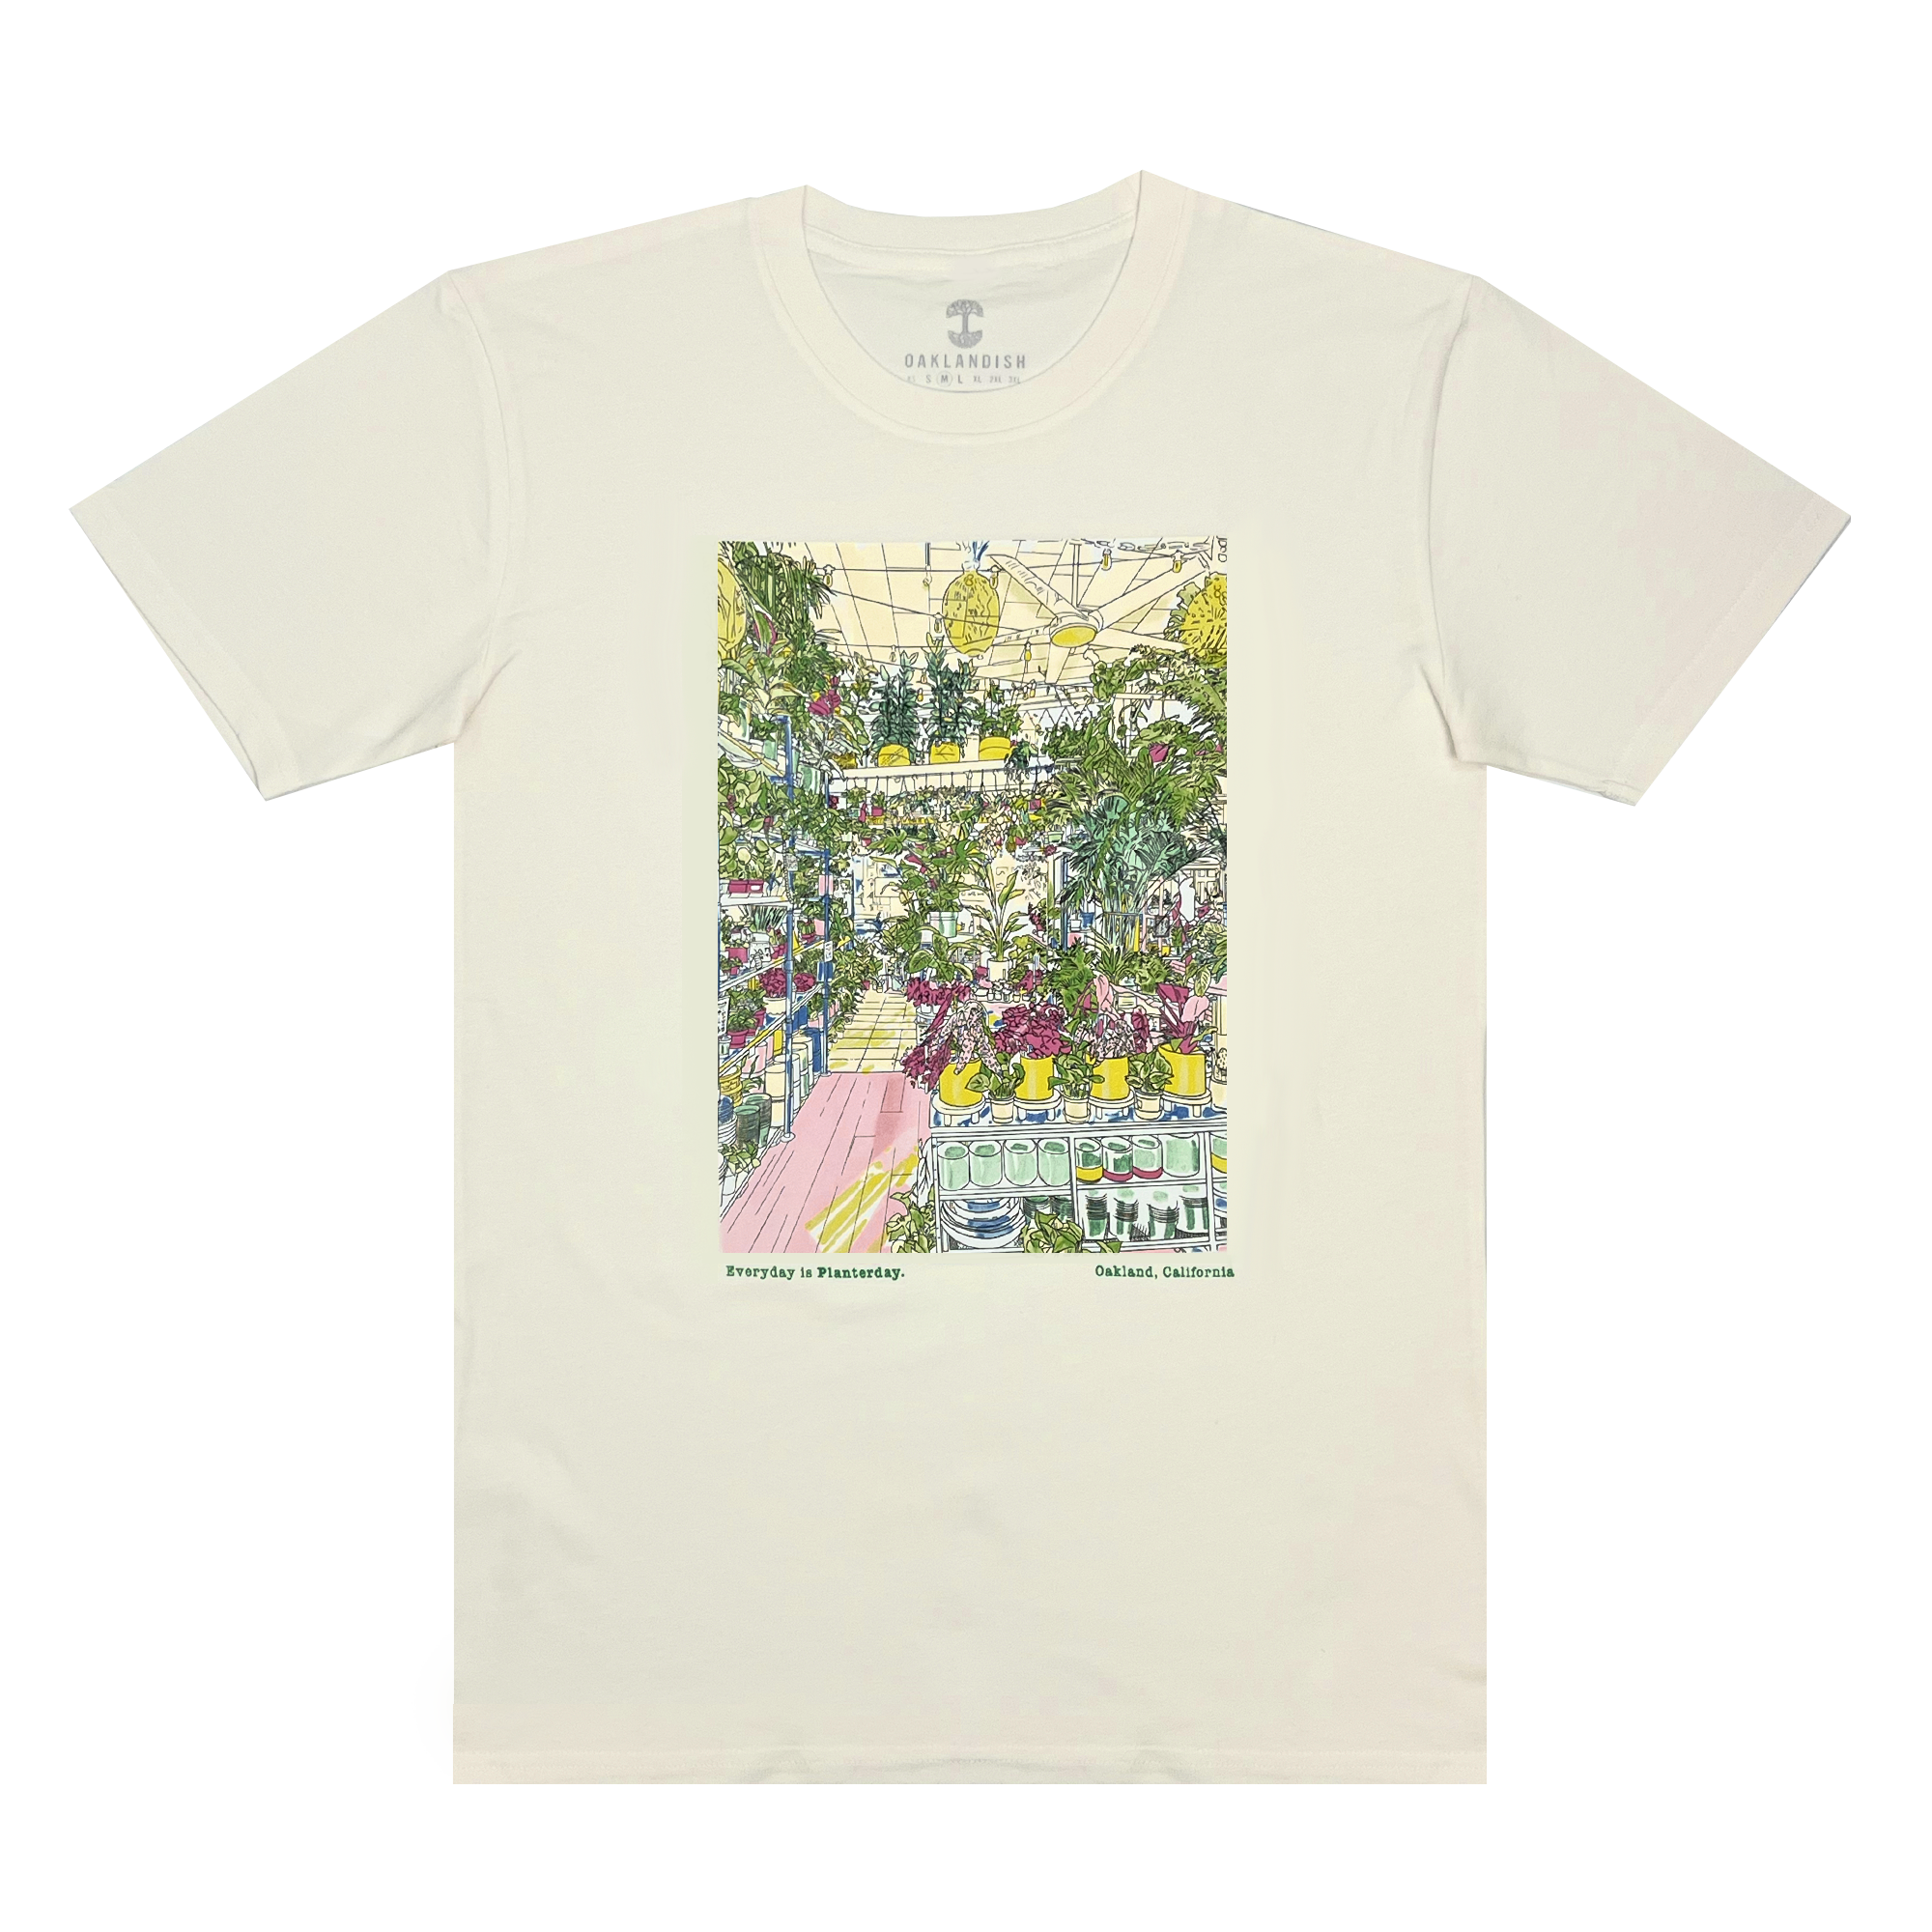 Natural cotton t-shirt with a large hand-drawn full color graphic of the inside of Planterday, a mission-driven plant shop in Oakland, CA.